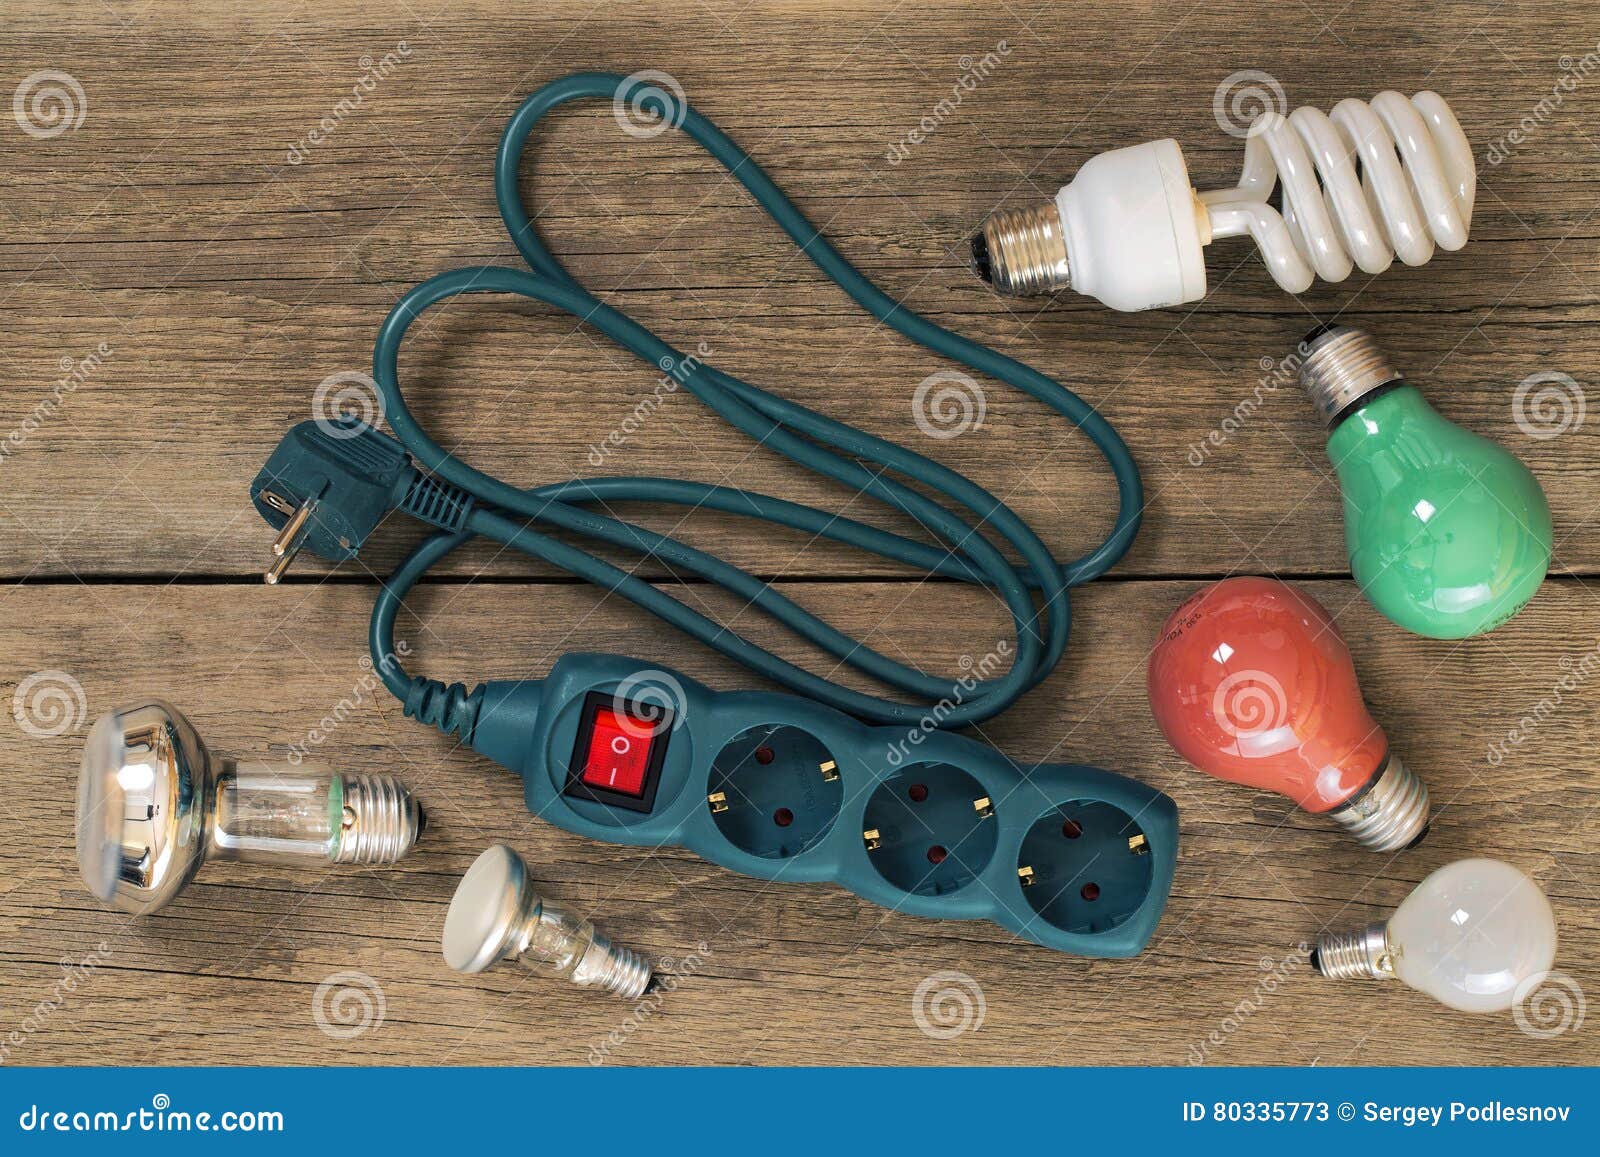 Various Lamps and Multi-outlet Extension Cord Stock Image - Image of plug,  savings: 80335773